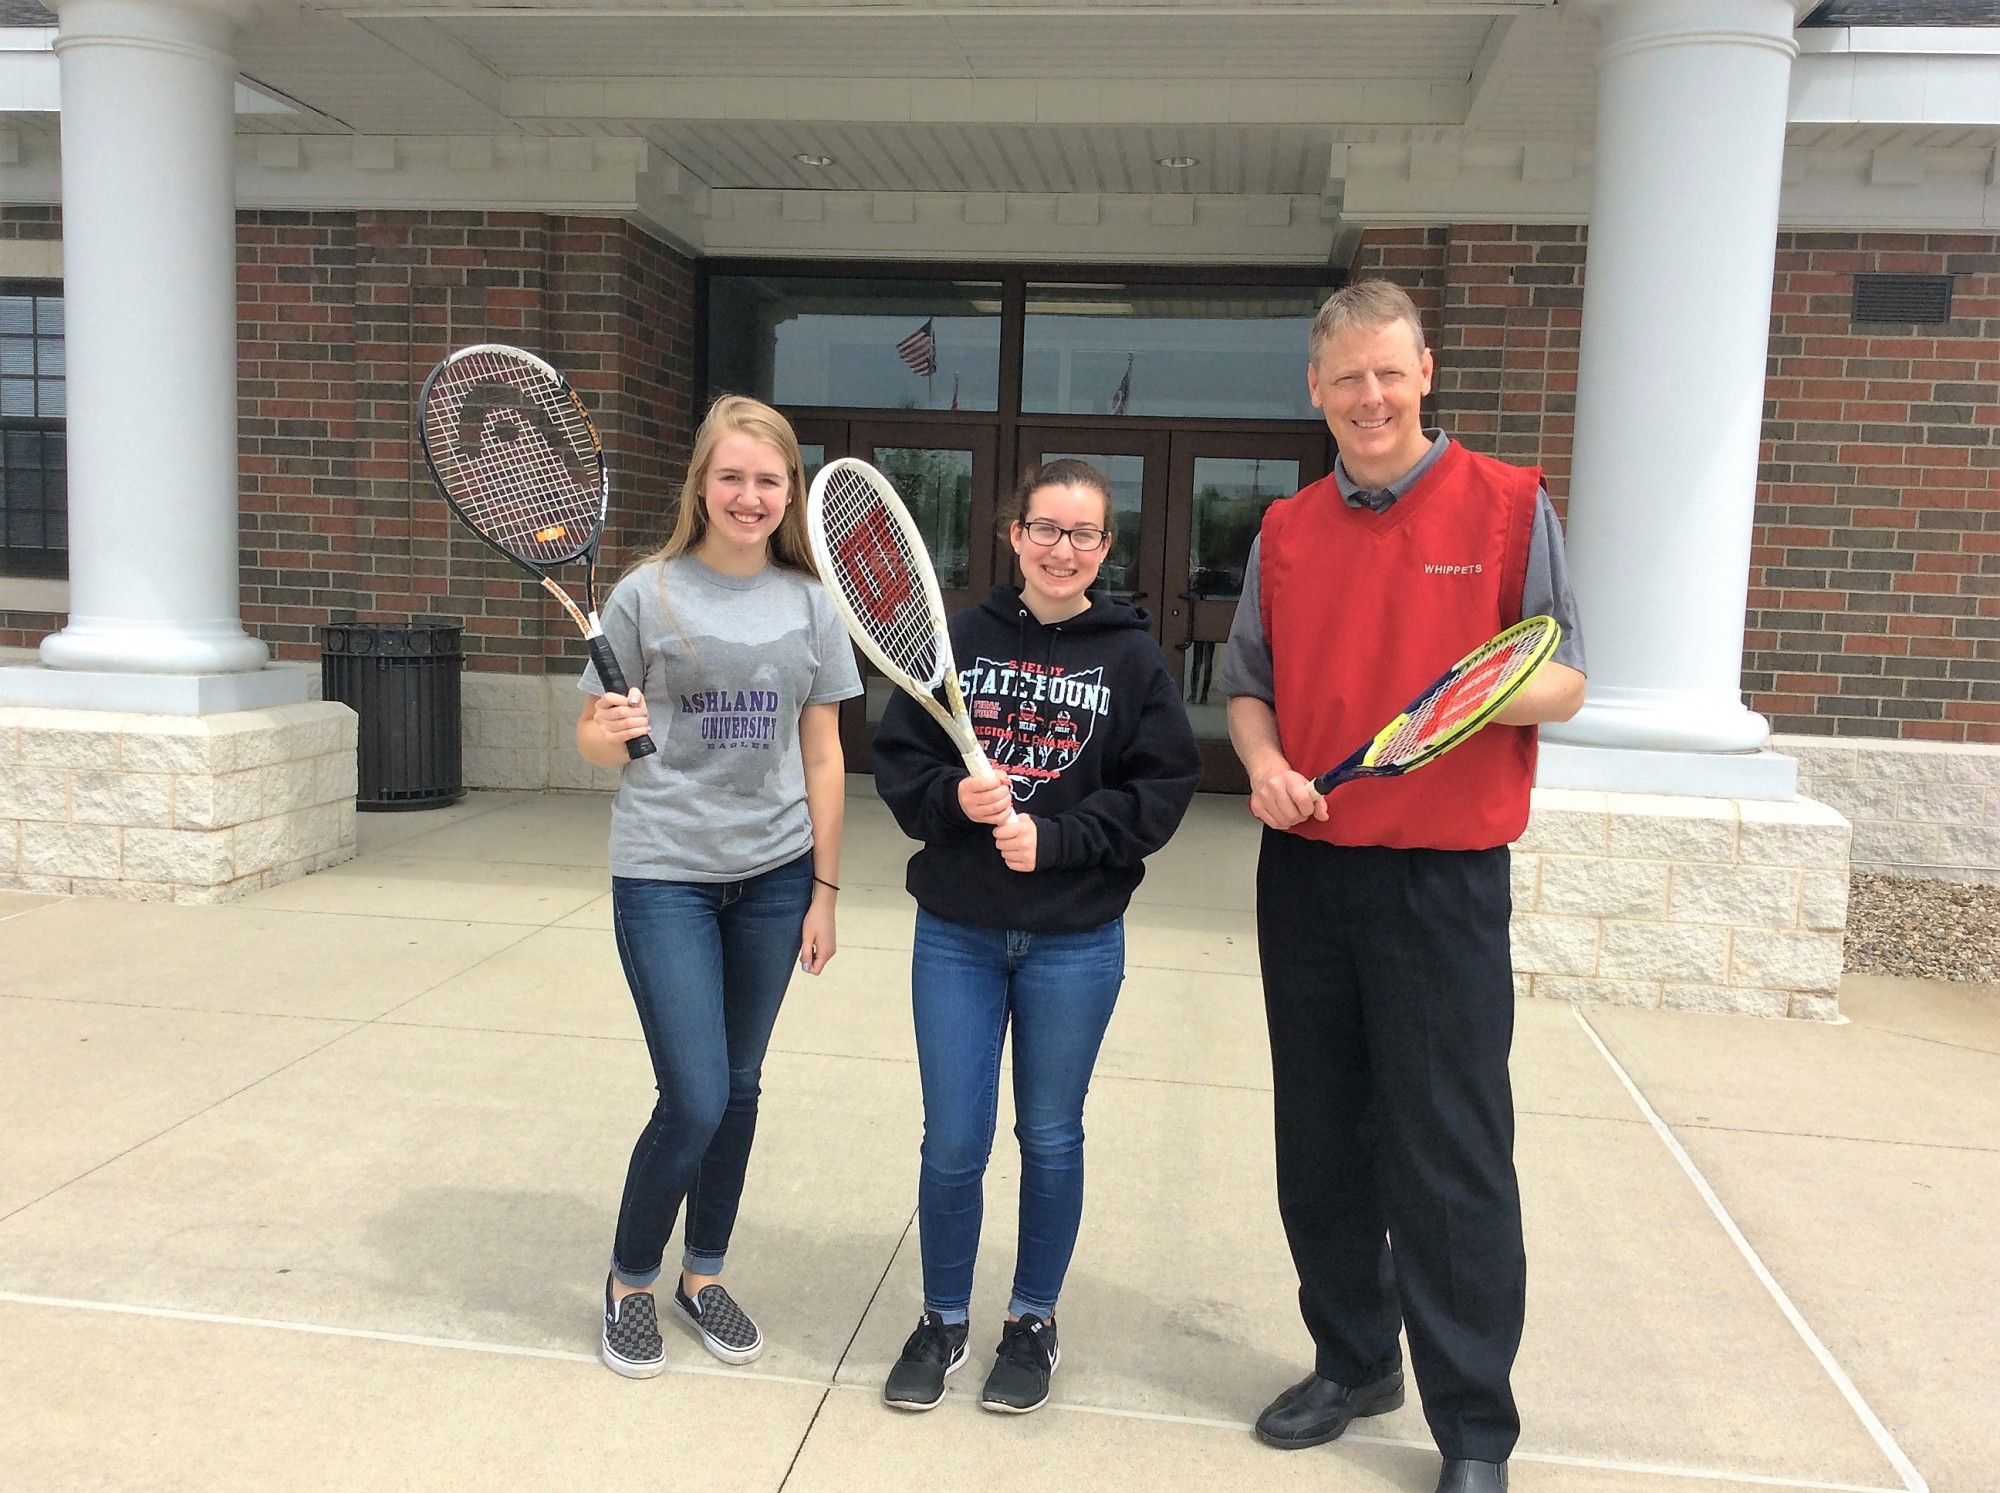 RCCS donates tennis racquets and fishing poles to youth programs    